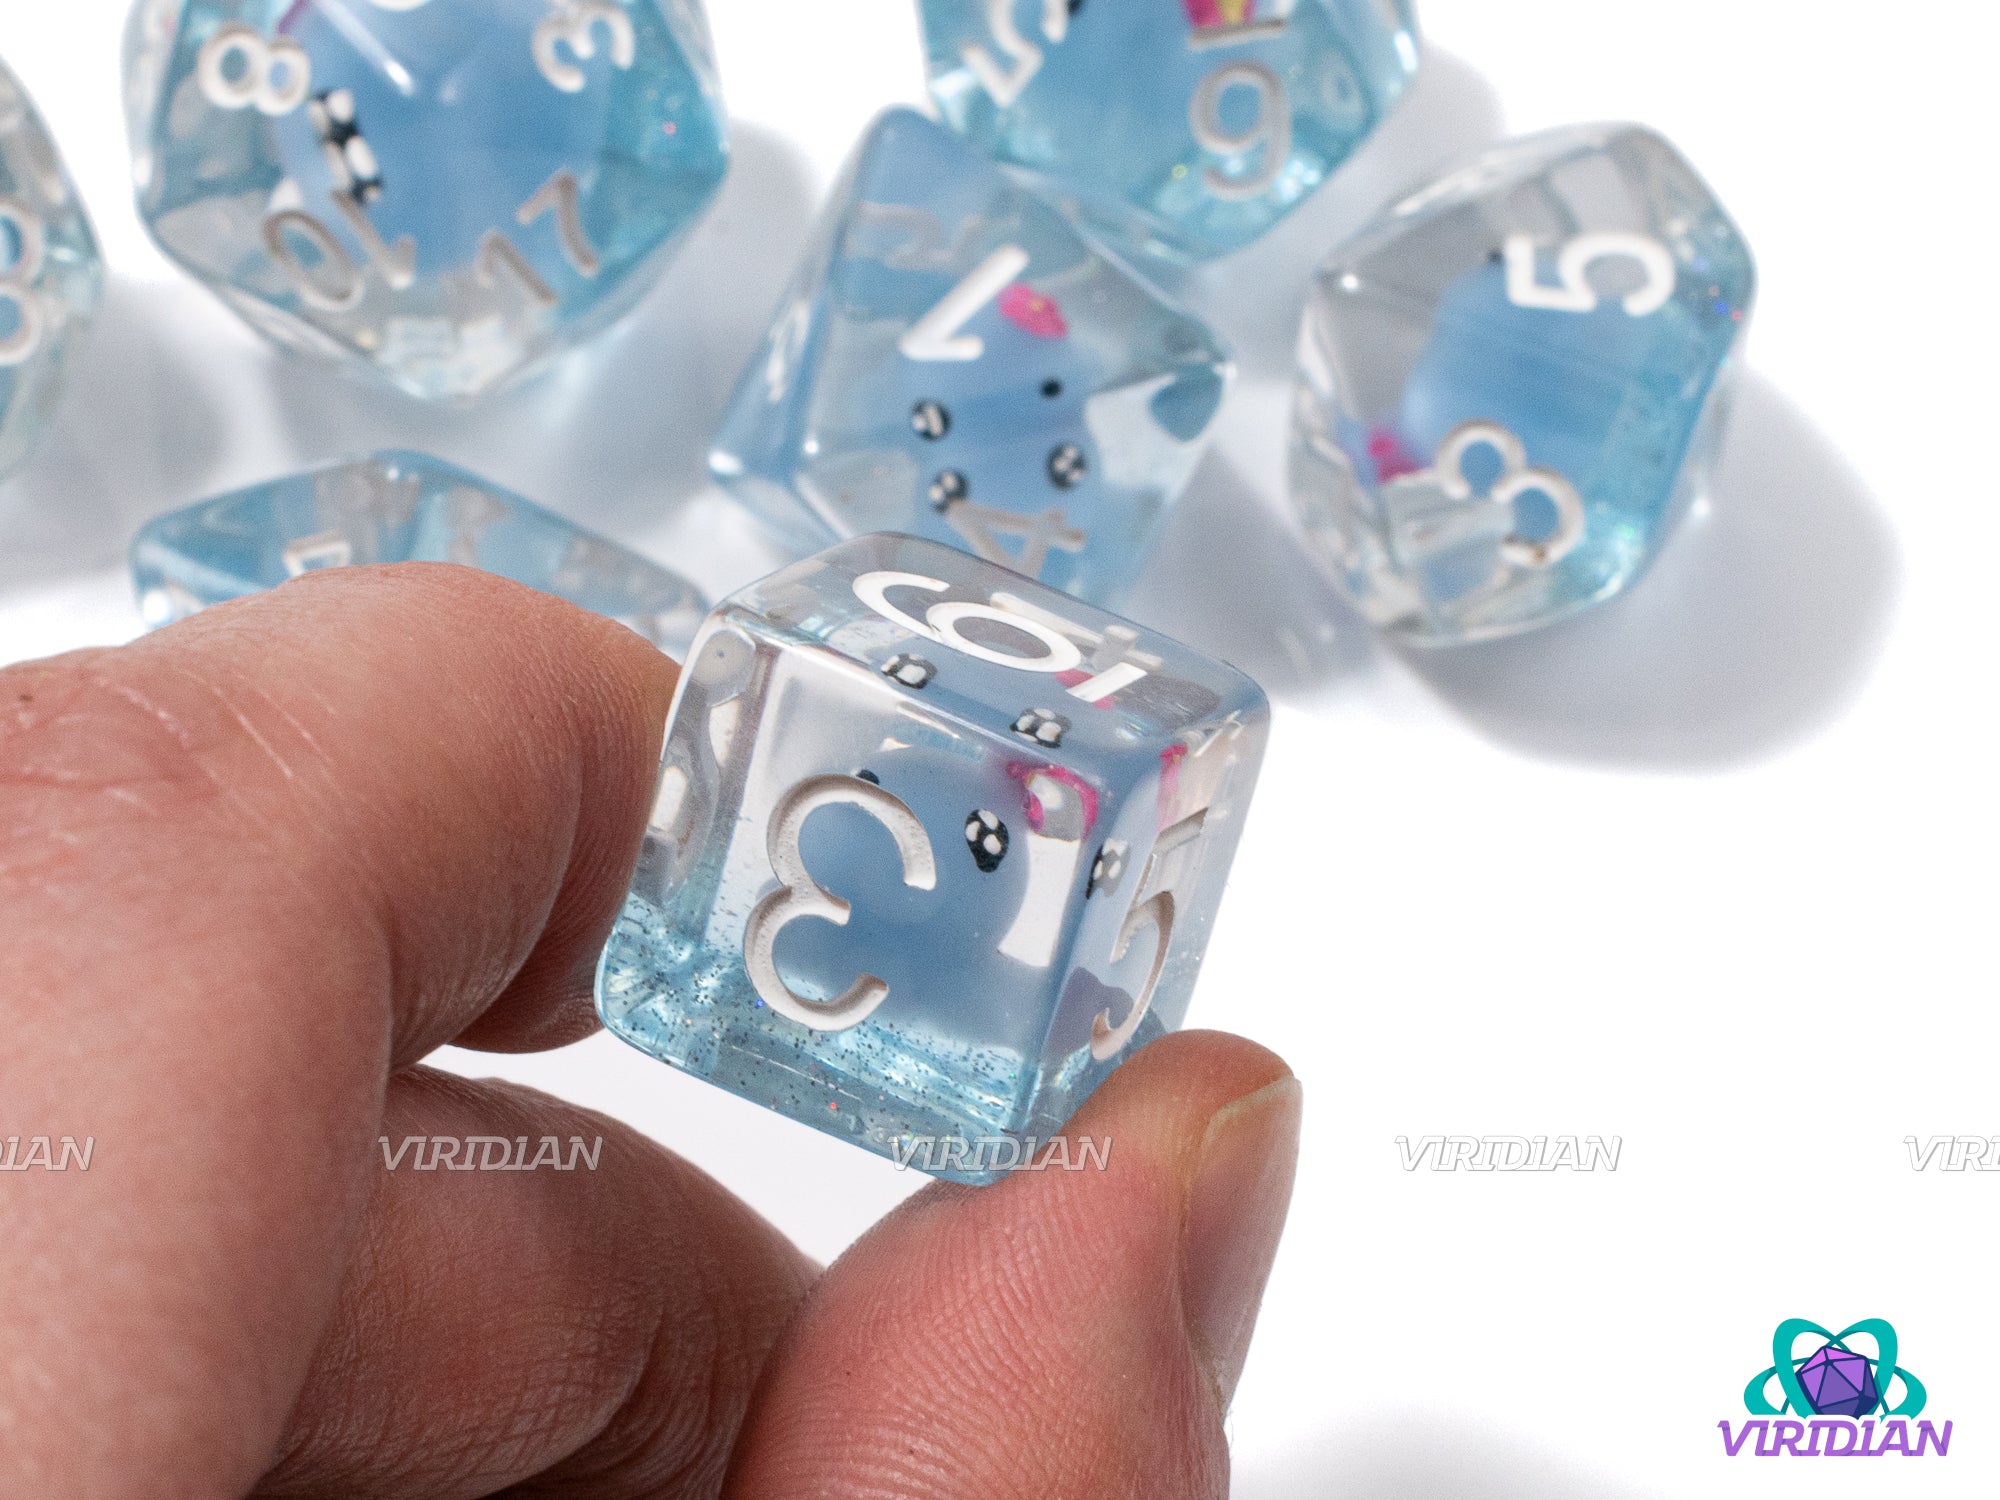 Derpy Octopus | Octo with Pink Bow, Light Blue-Aqua Glitter Layer, Clear | Resin Dice Set (7)